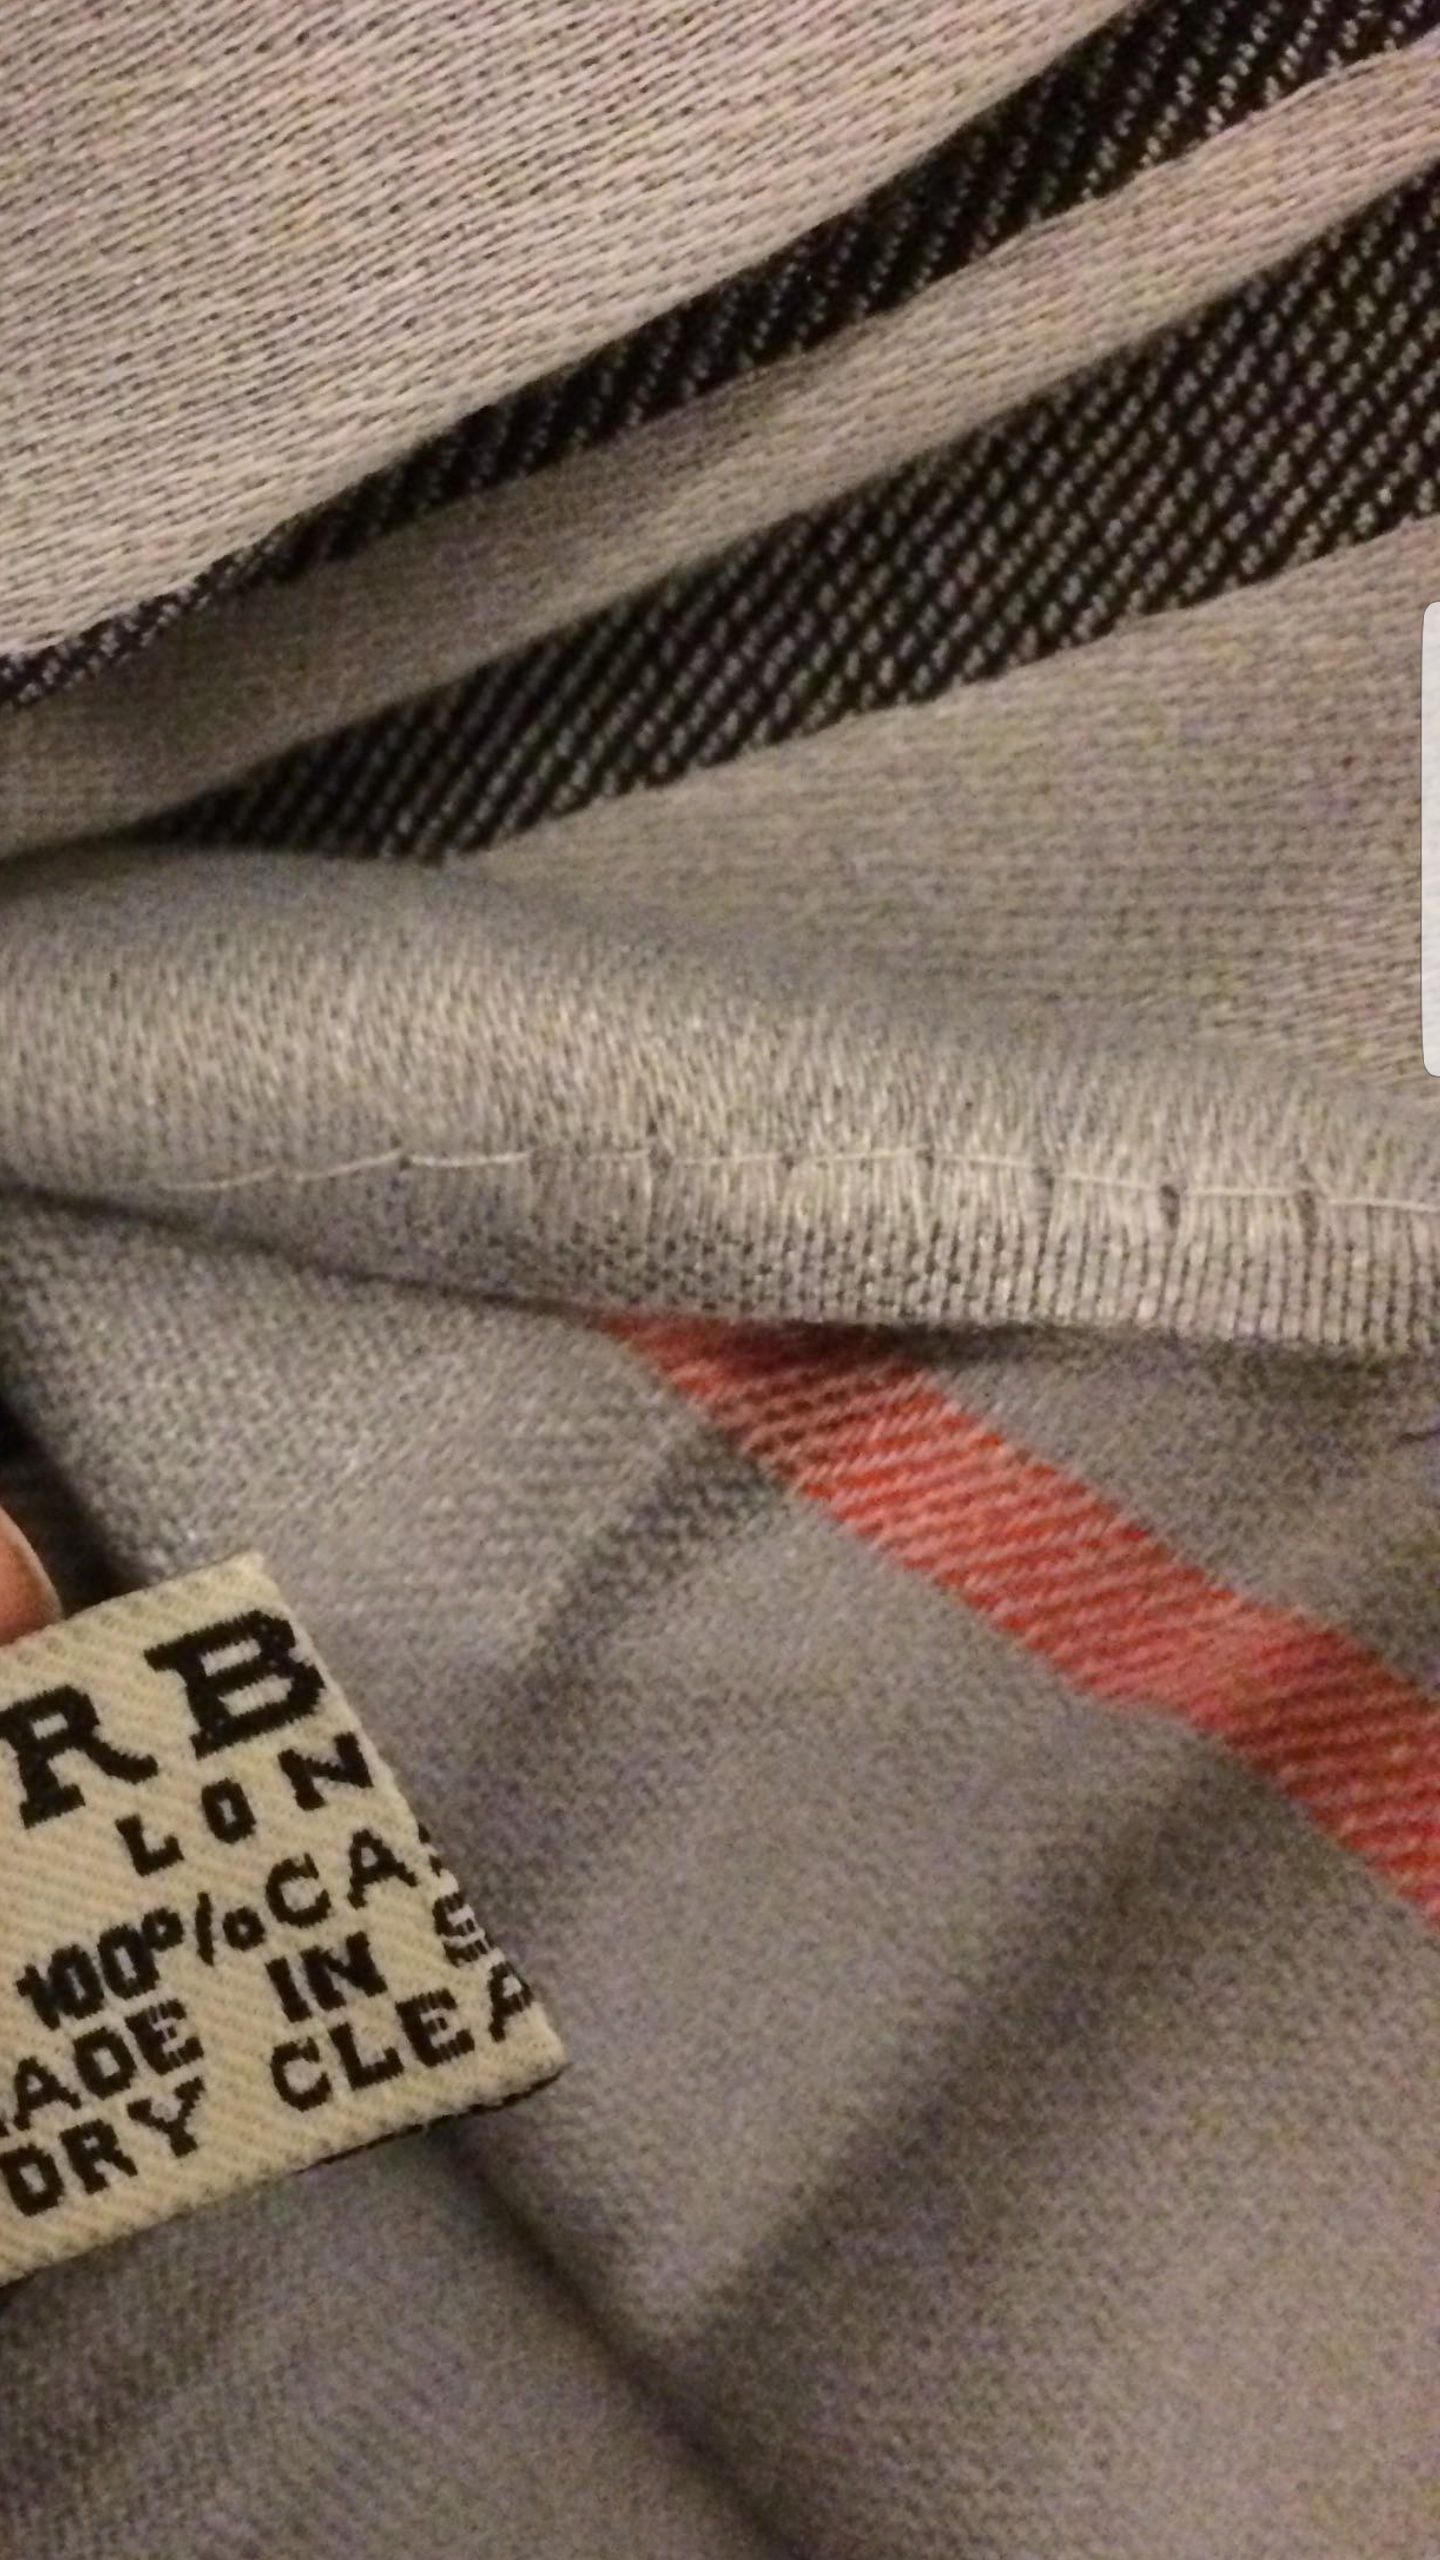 How to Spot a Fake Burberry Scarf - Learn how to